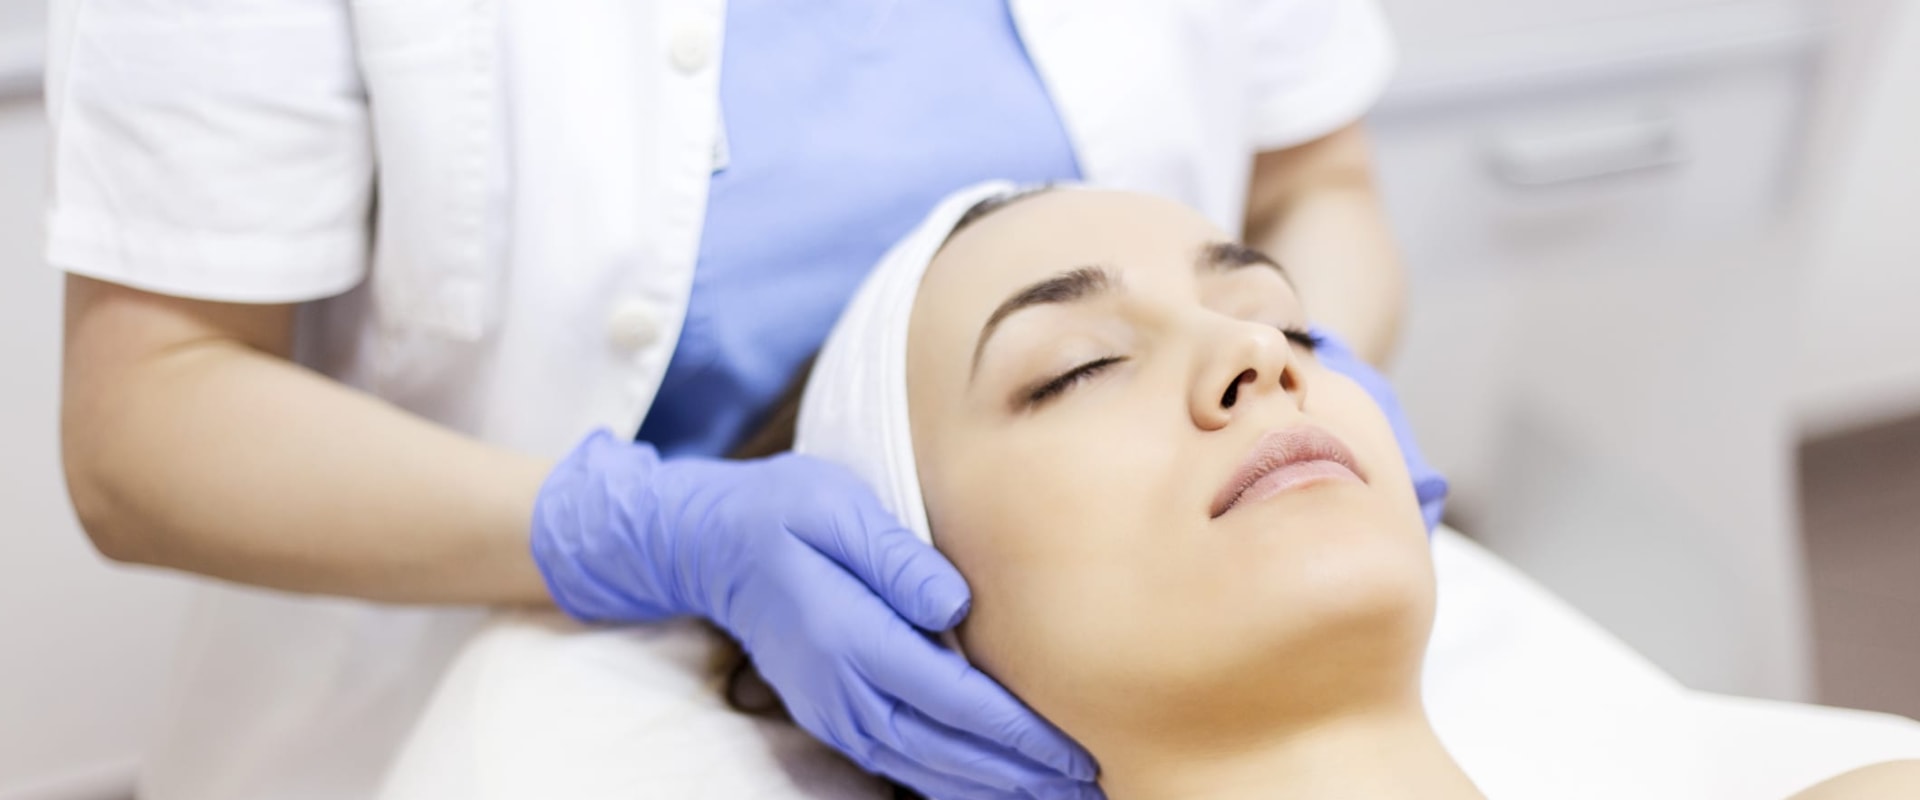 Everything You Need to Know About Different Types of Facial Treatments